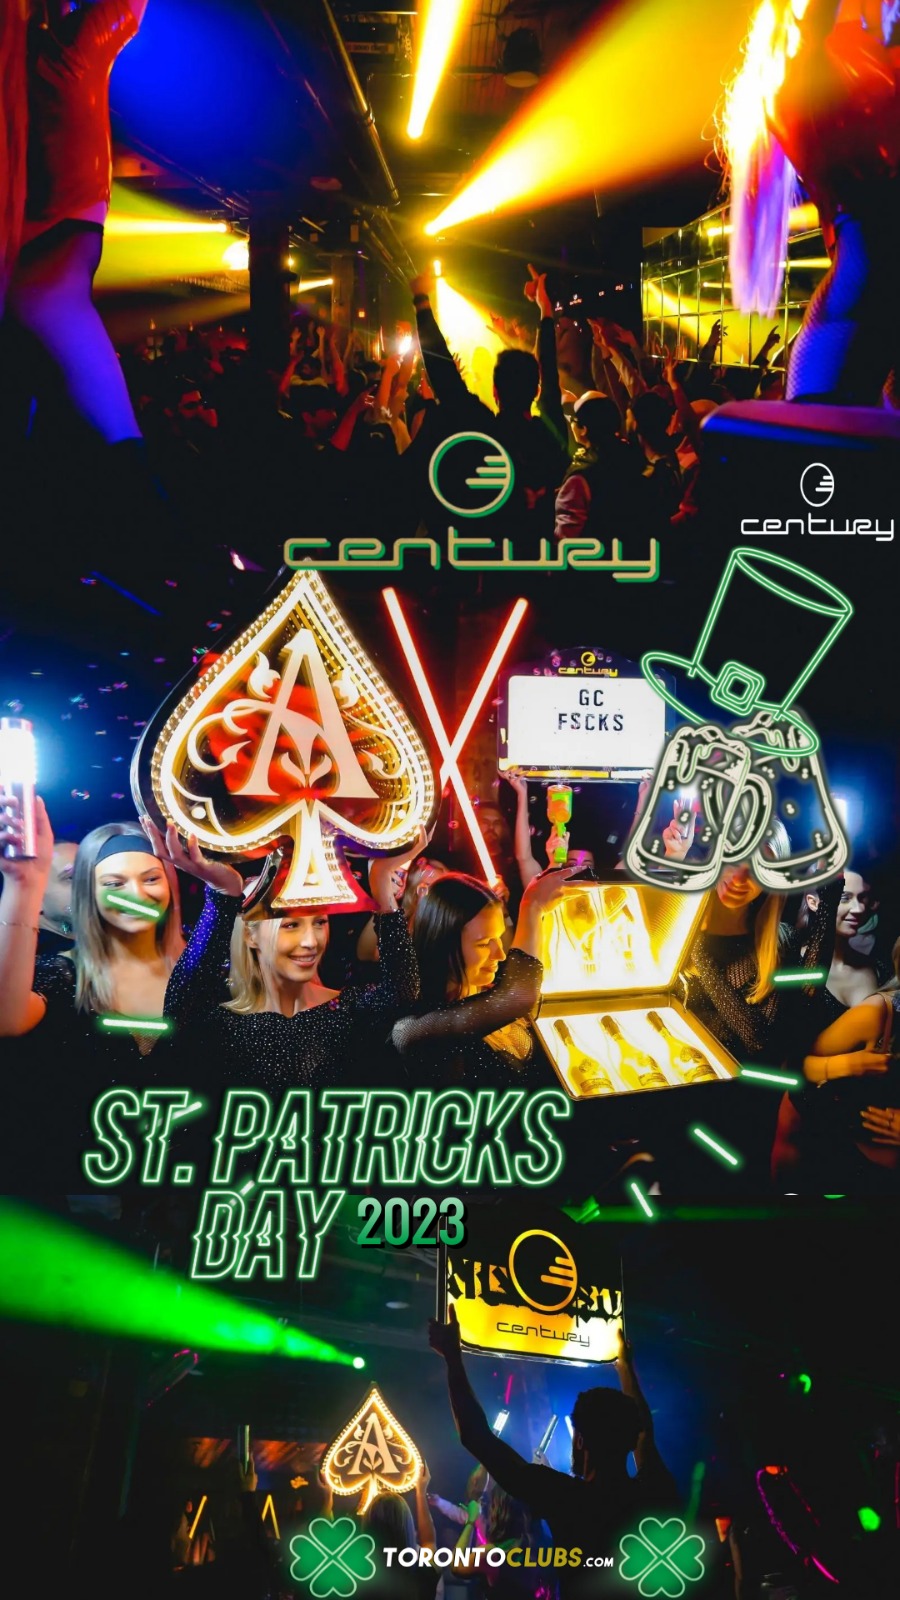 ST. PATRICK'S DAY 2023 EVENT & PARTY AT CENTURY TORONTO